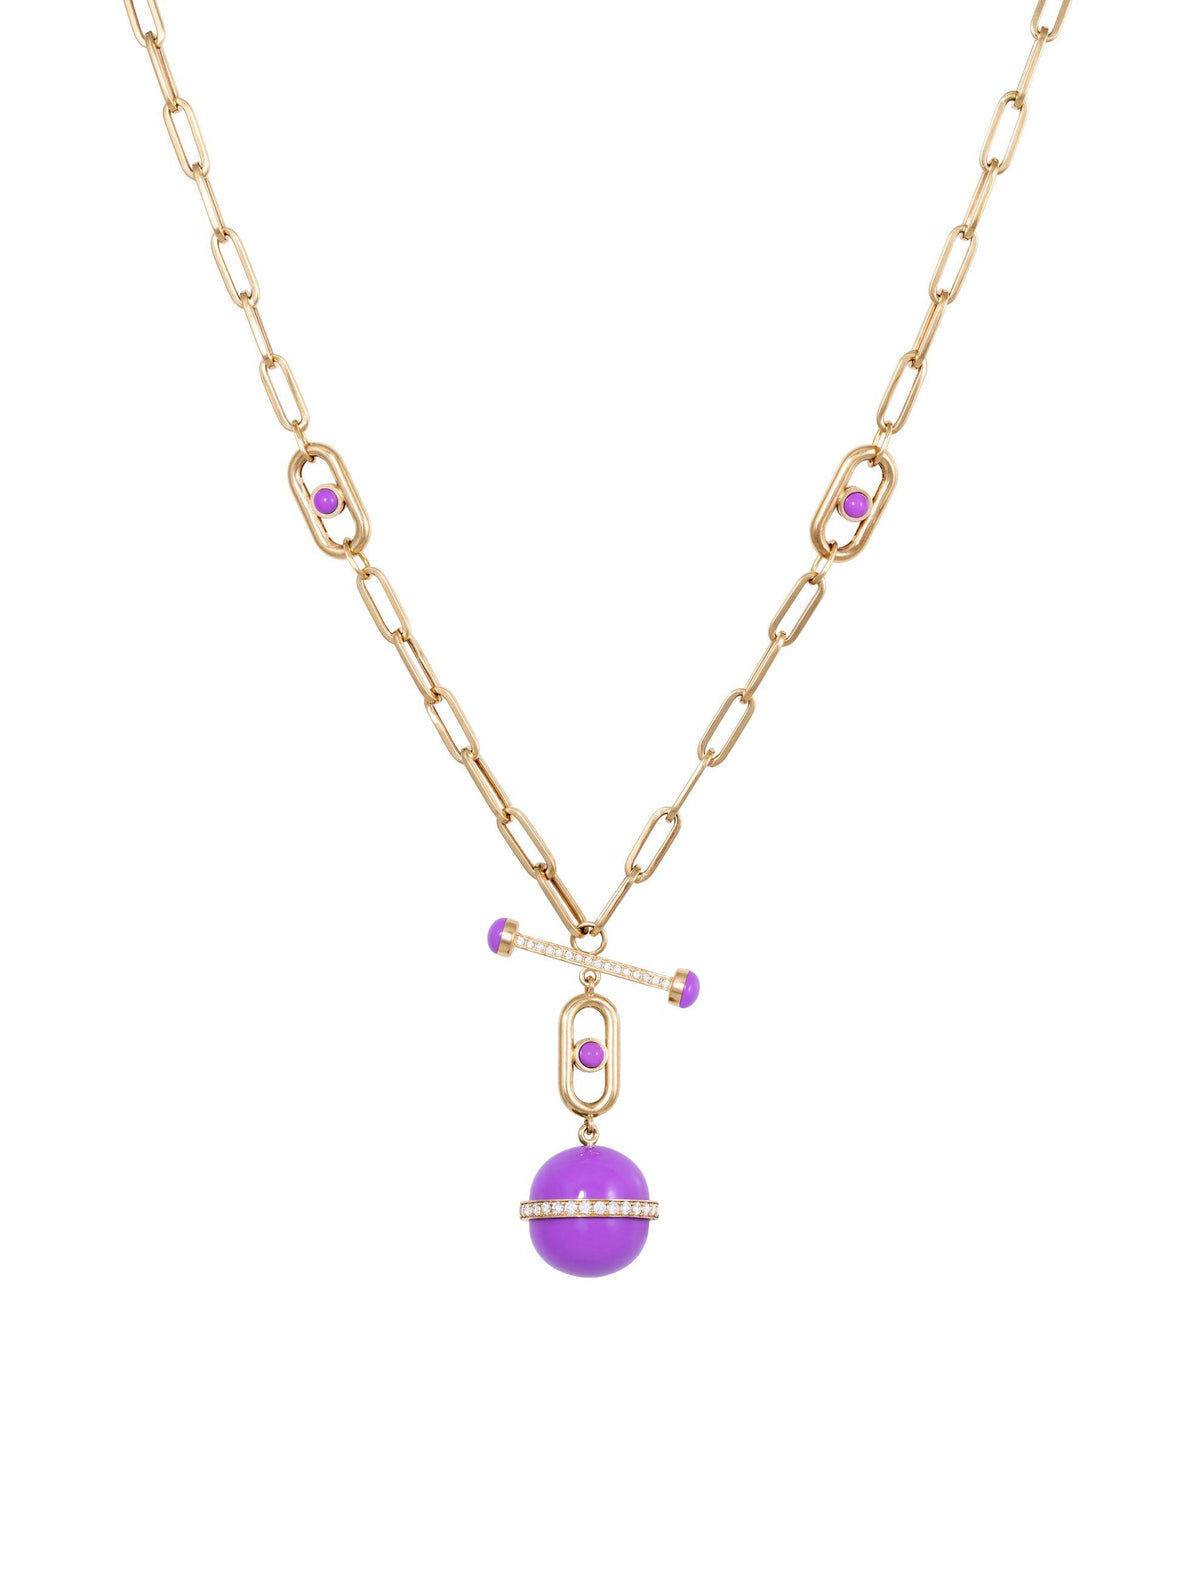 The Statement Purple Atom Necklace by L'Atelier Liya - Tales of Stones